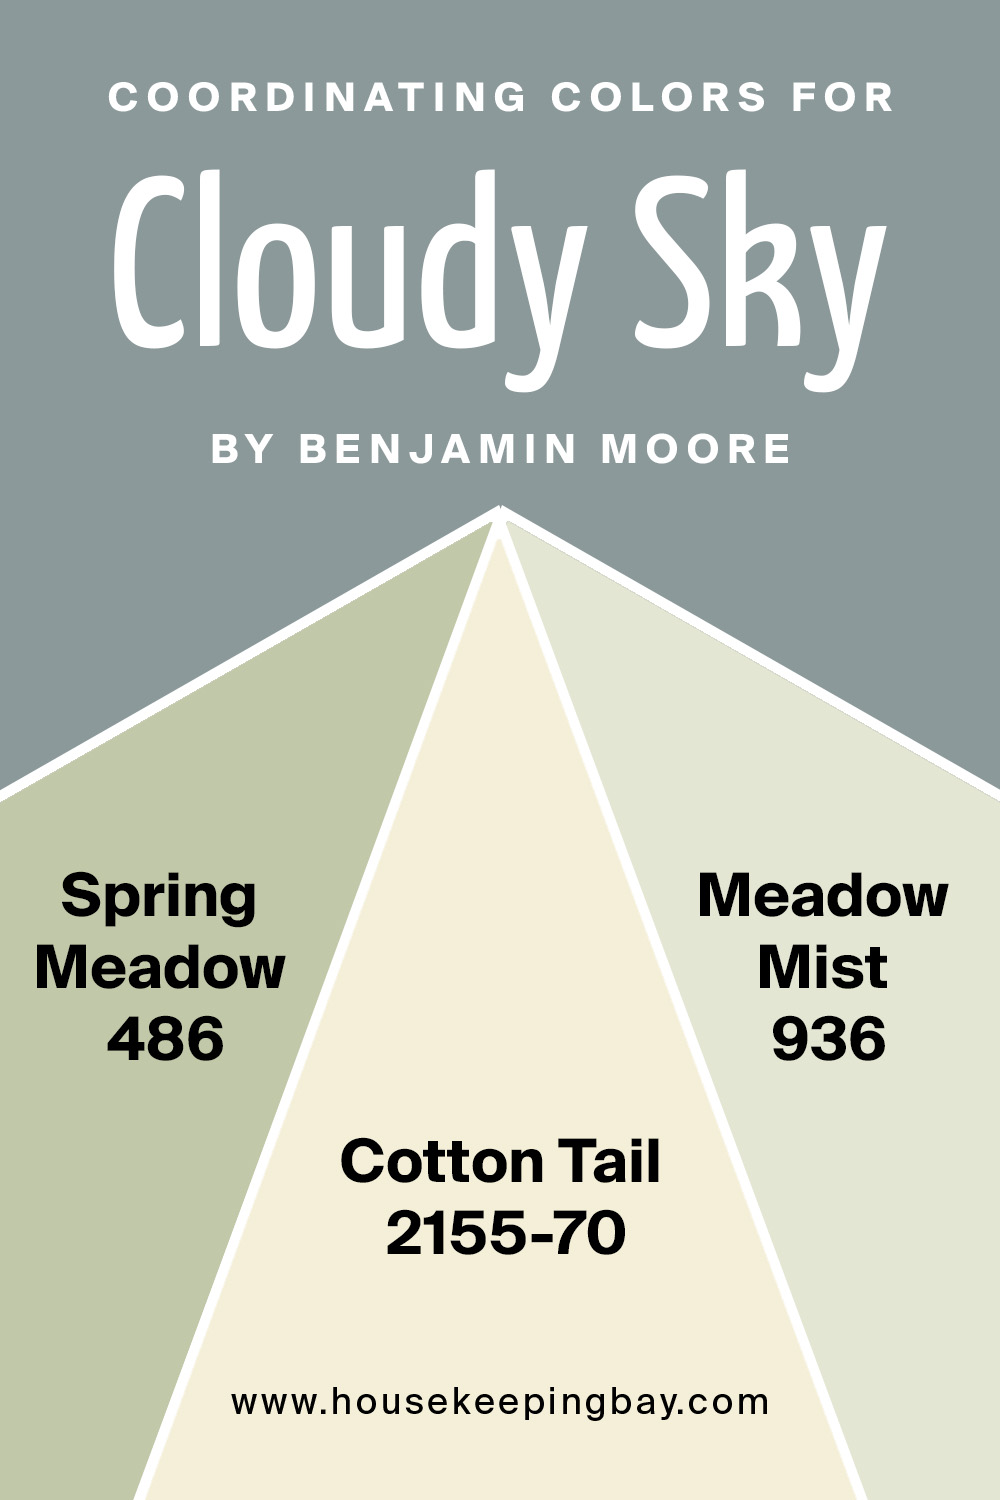 coordinating colors for cloudy sky 2122-30 by benjamin moore